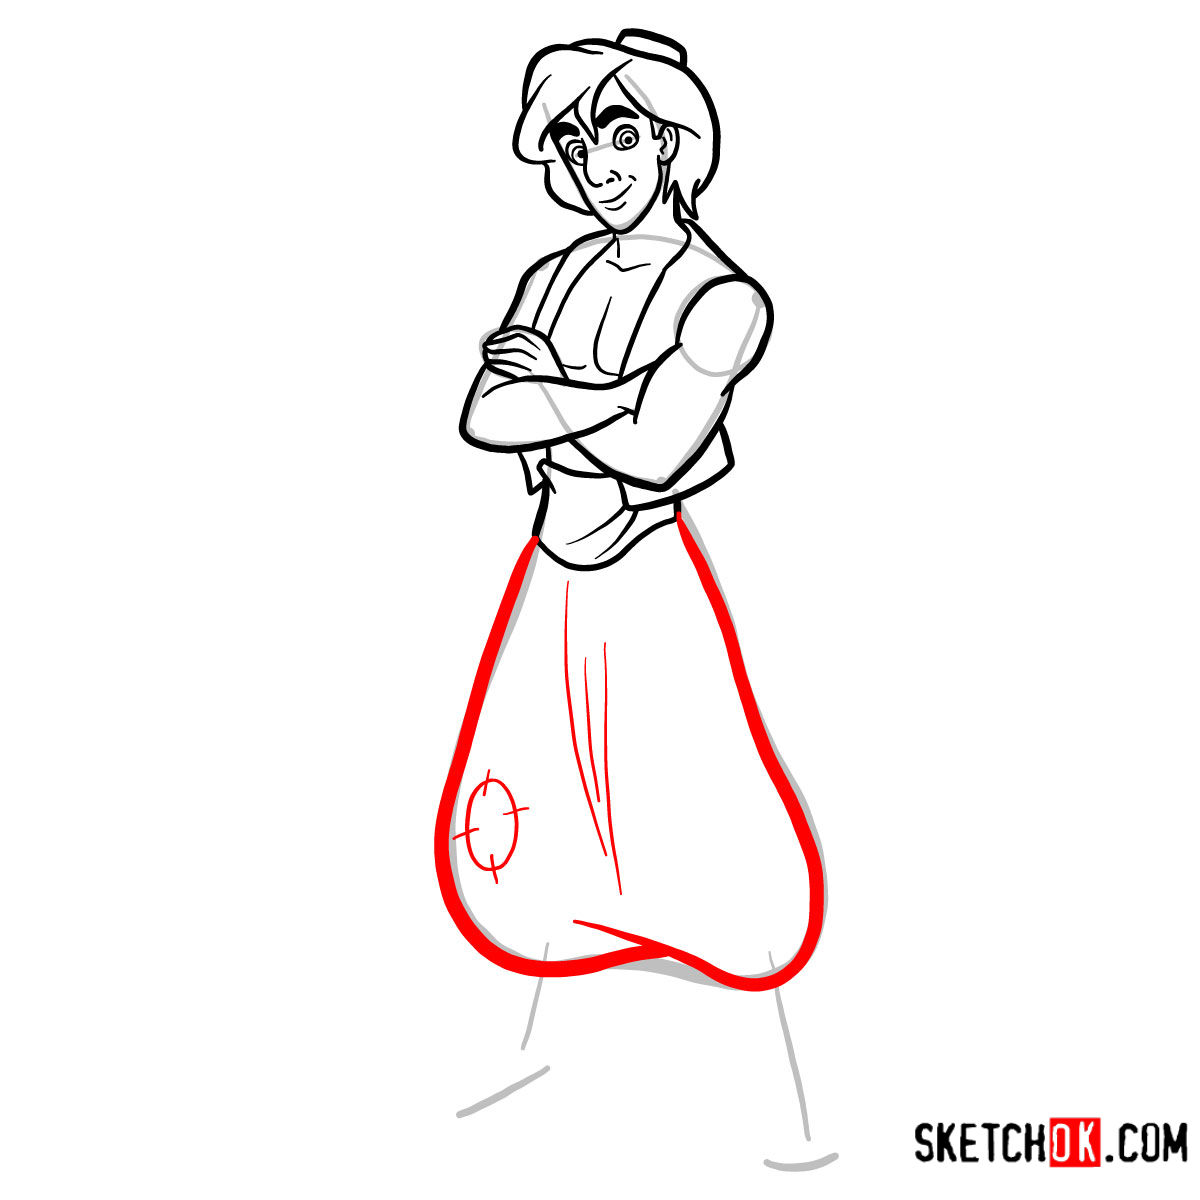 How to draw Aladdin from Disney's animated series - step 10